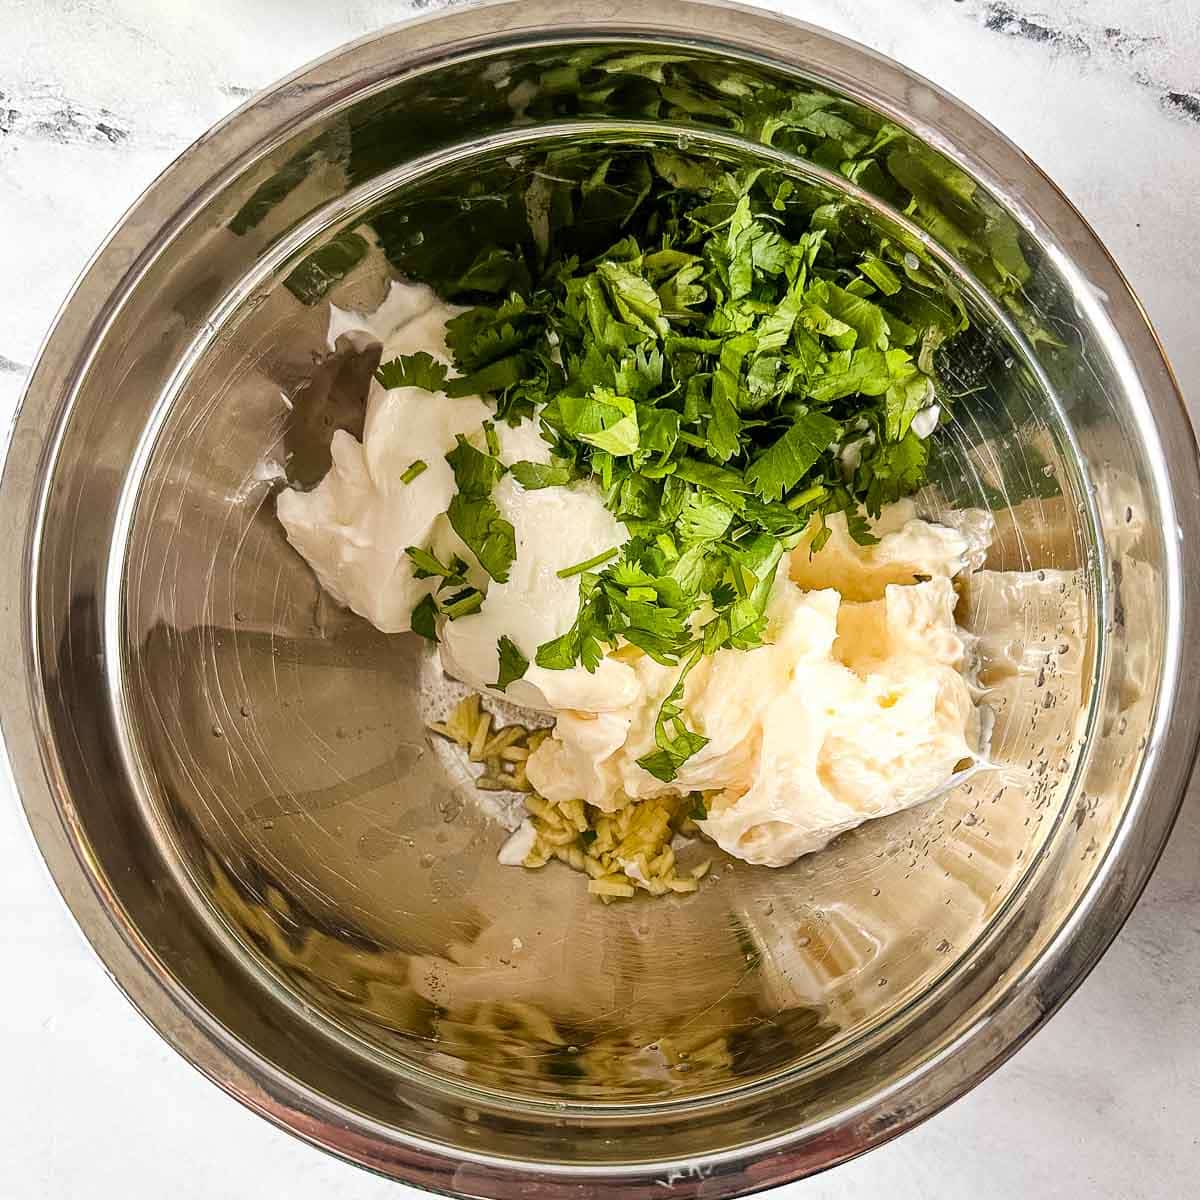 The ingredients for cilantro lime crema in a silver bowl.